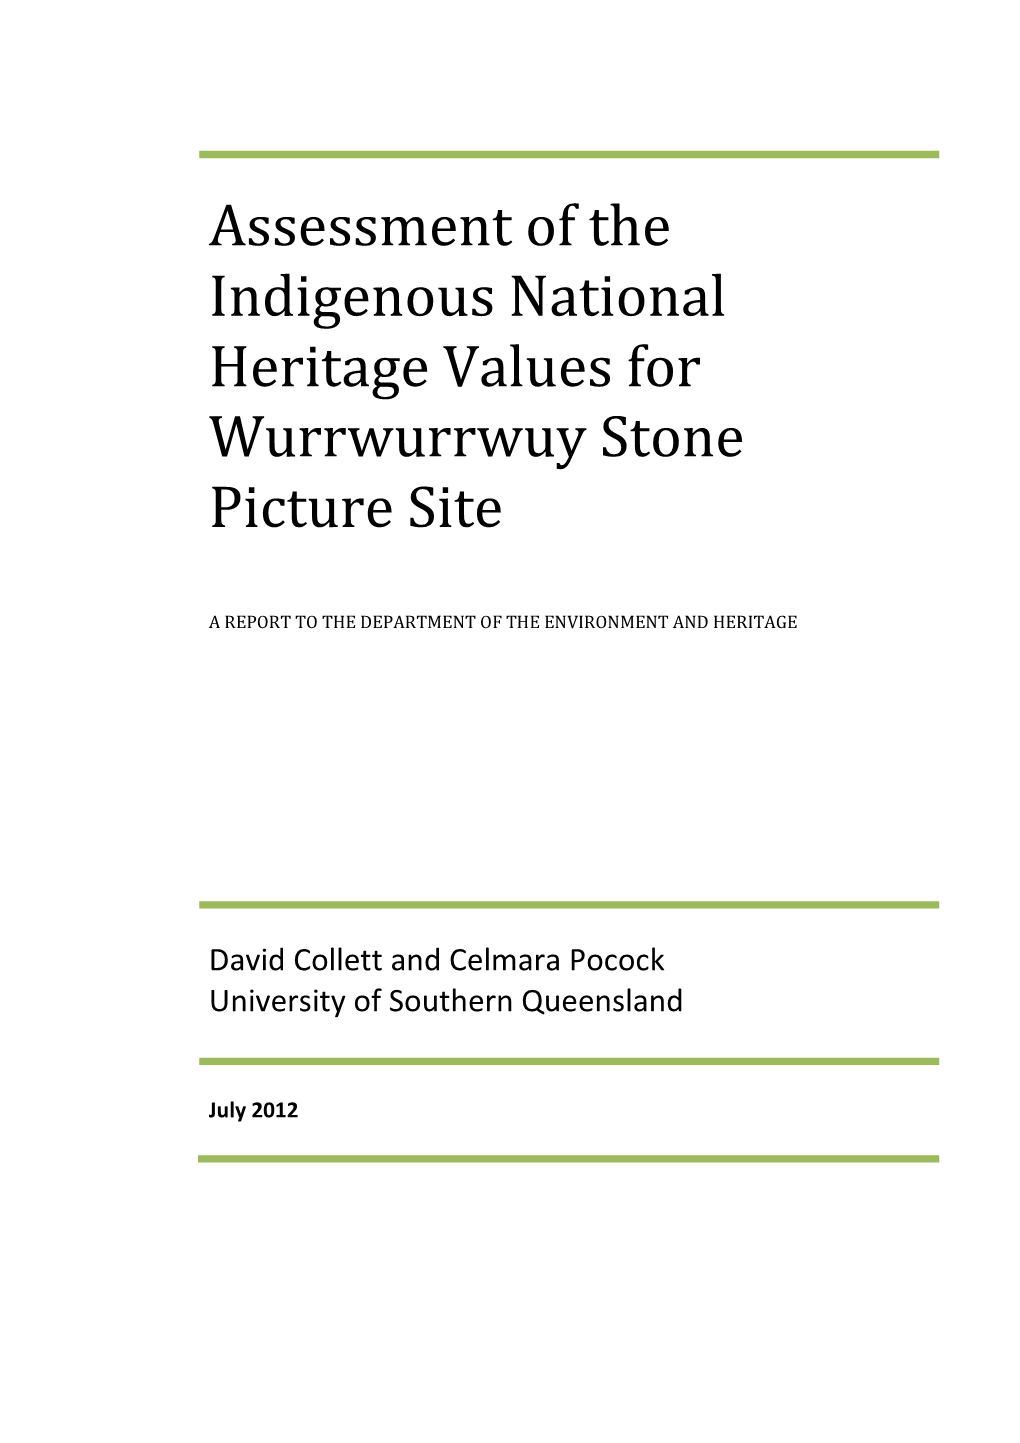 Assessment of the Indigenous National Heritage Values for Wurrwurrwuy Stone Picture Site